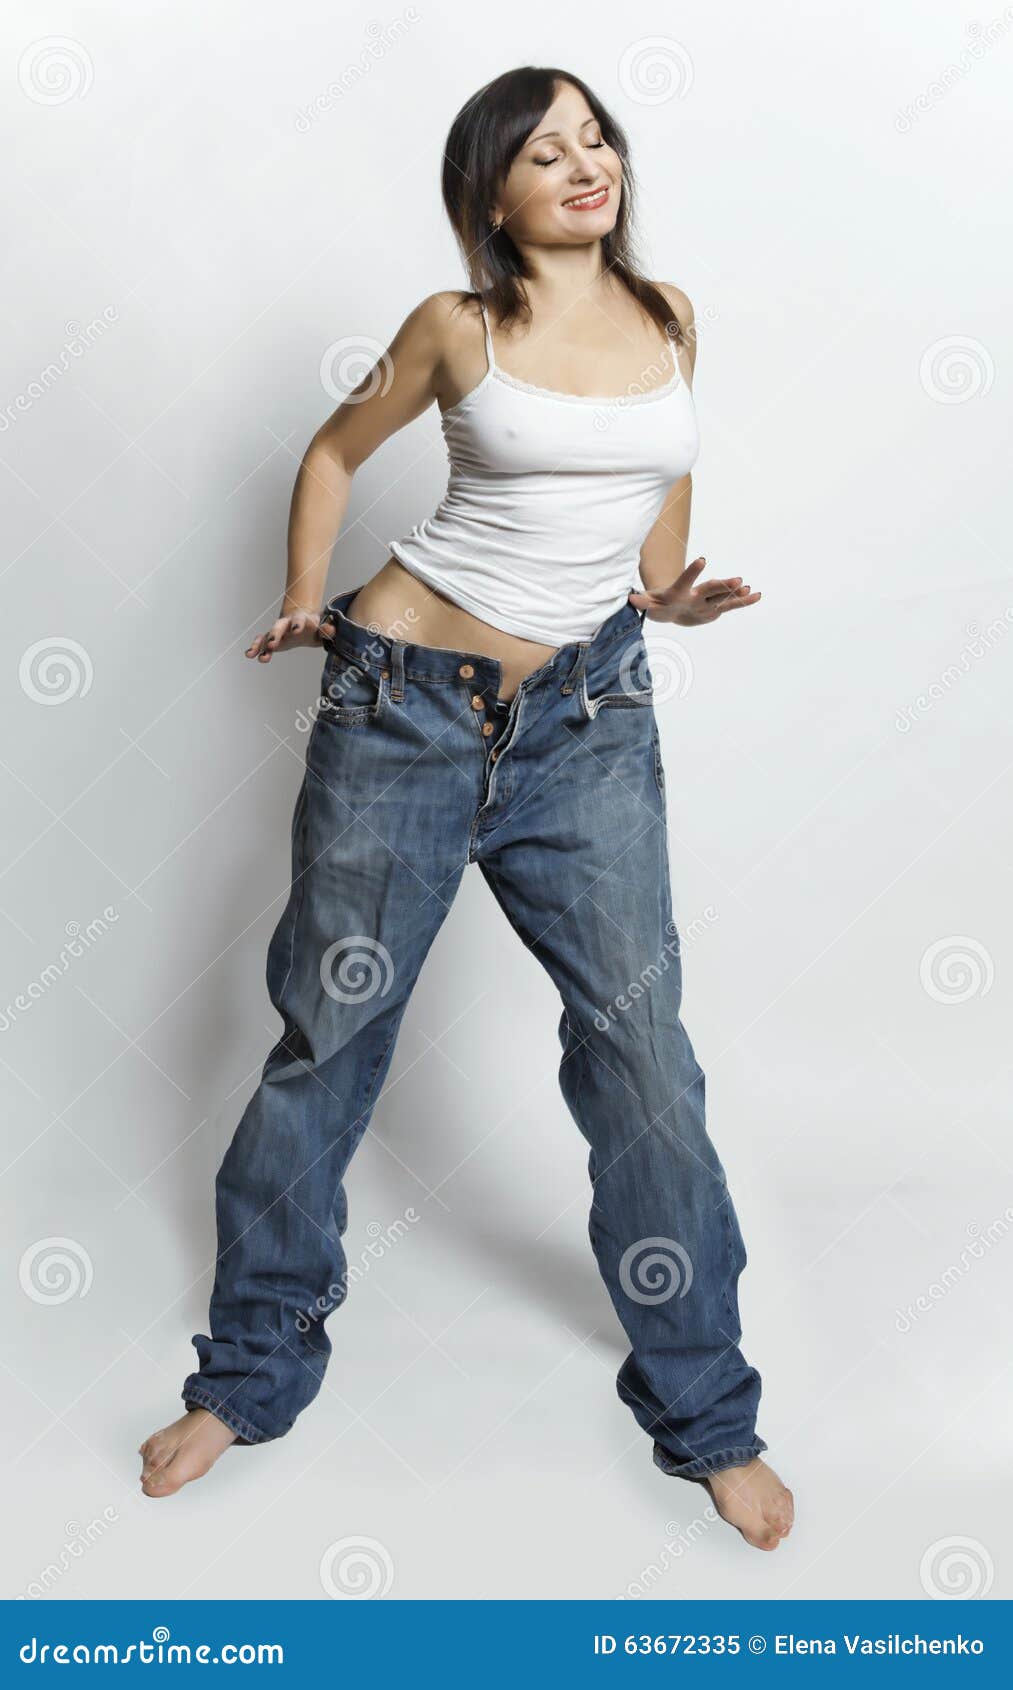 Woman Dancing and Wearing Boyfriend S Jeans Stock Image - Image of ...